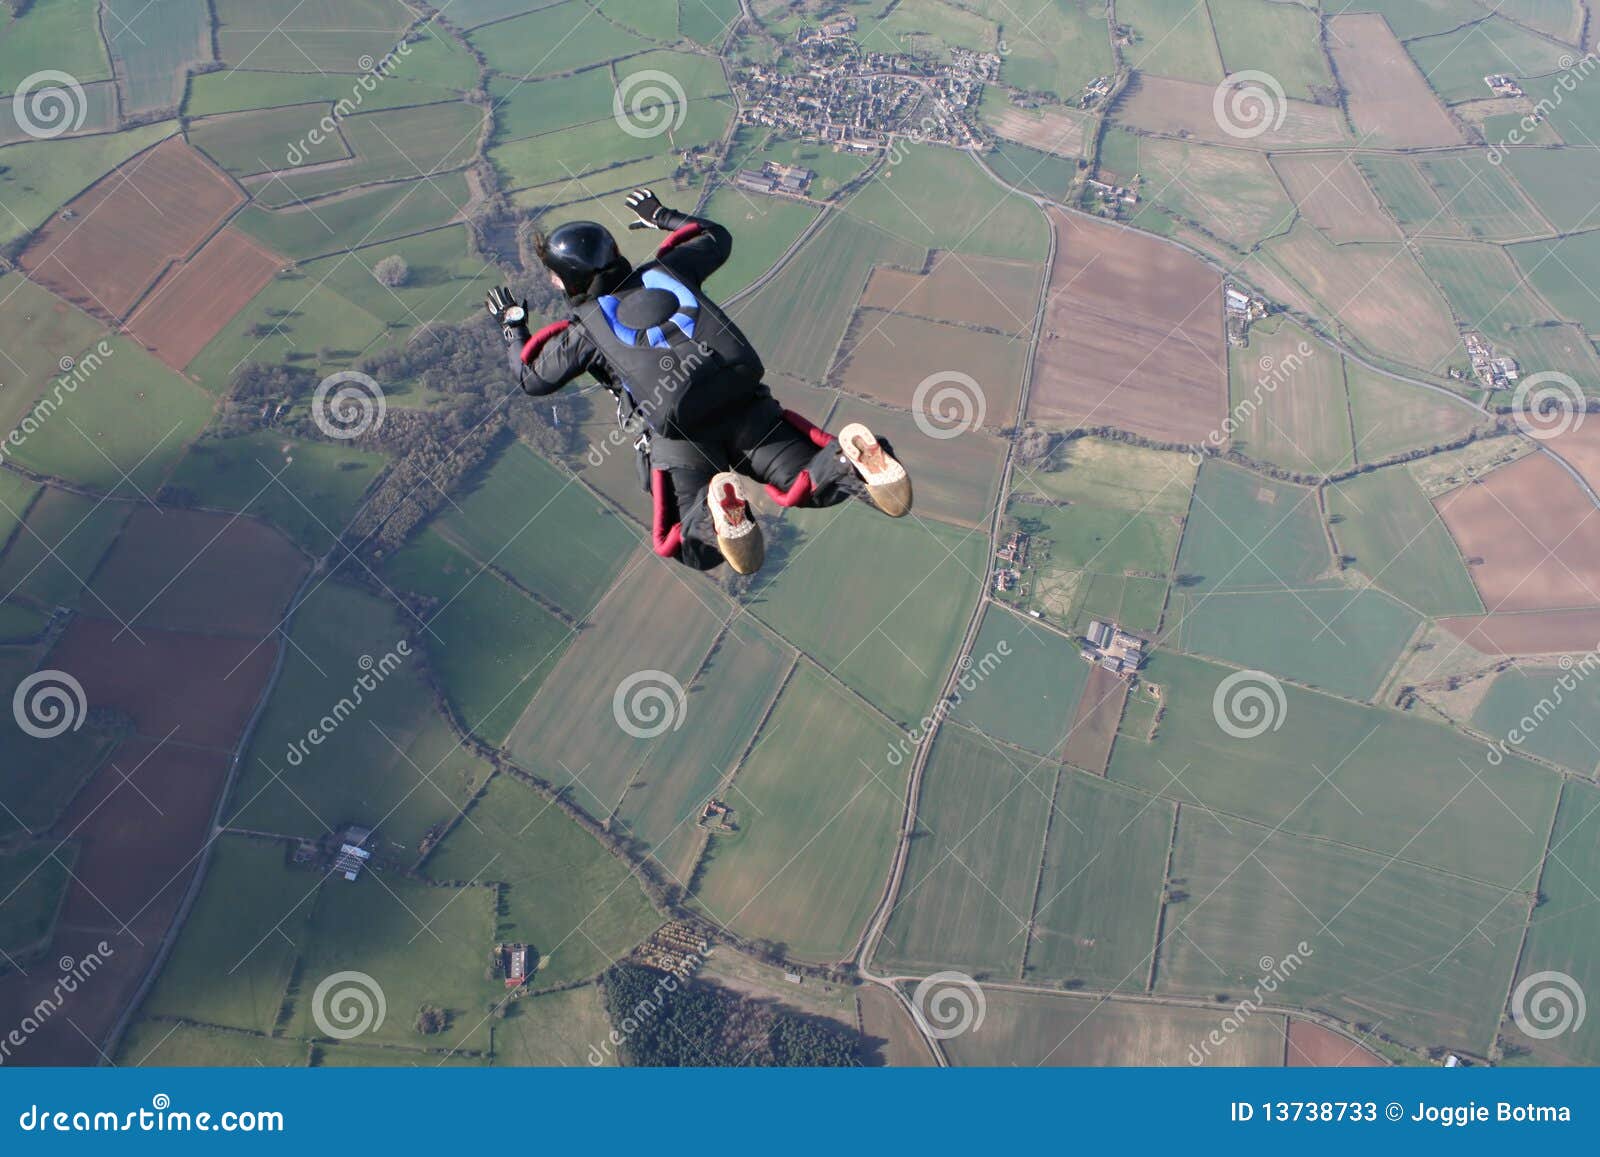 solo skydiver in freefall